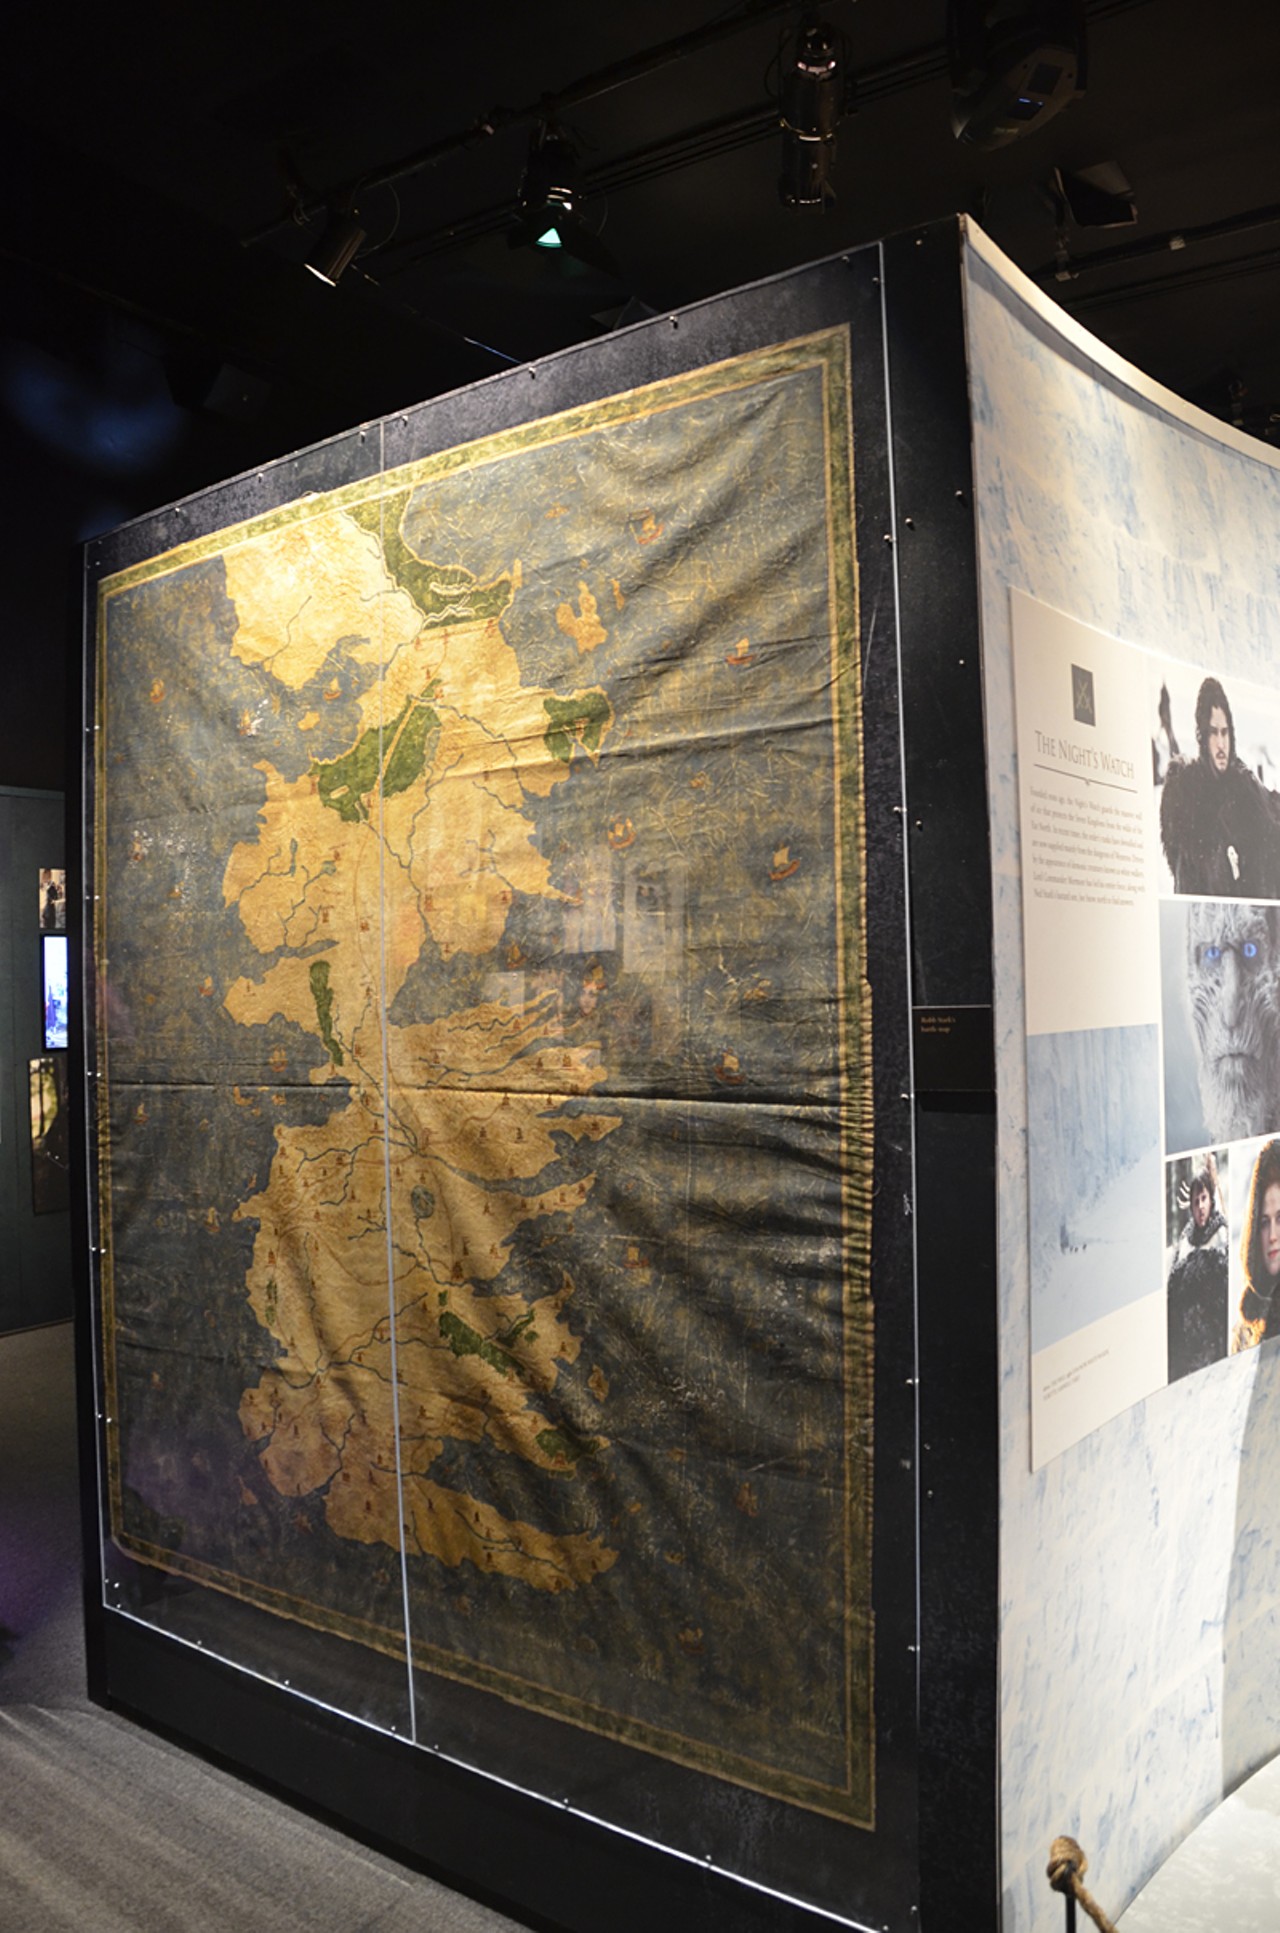 Robb Stark's battle map is displayed in the exhibit.